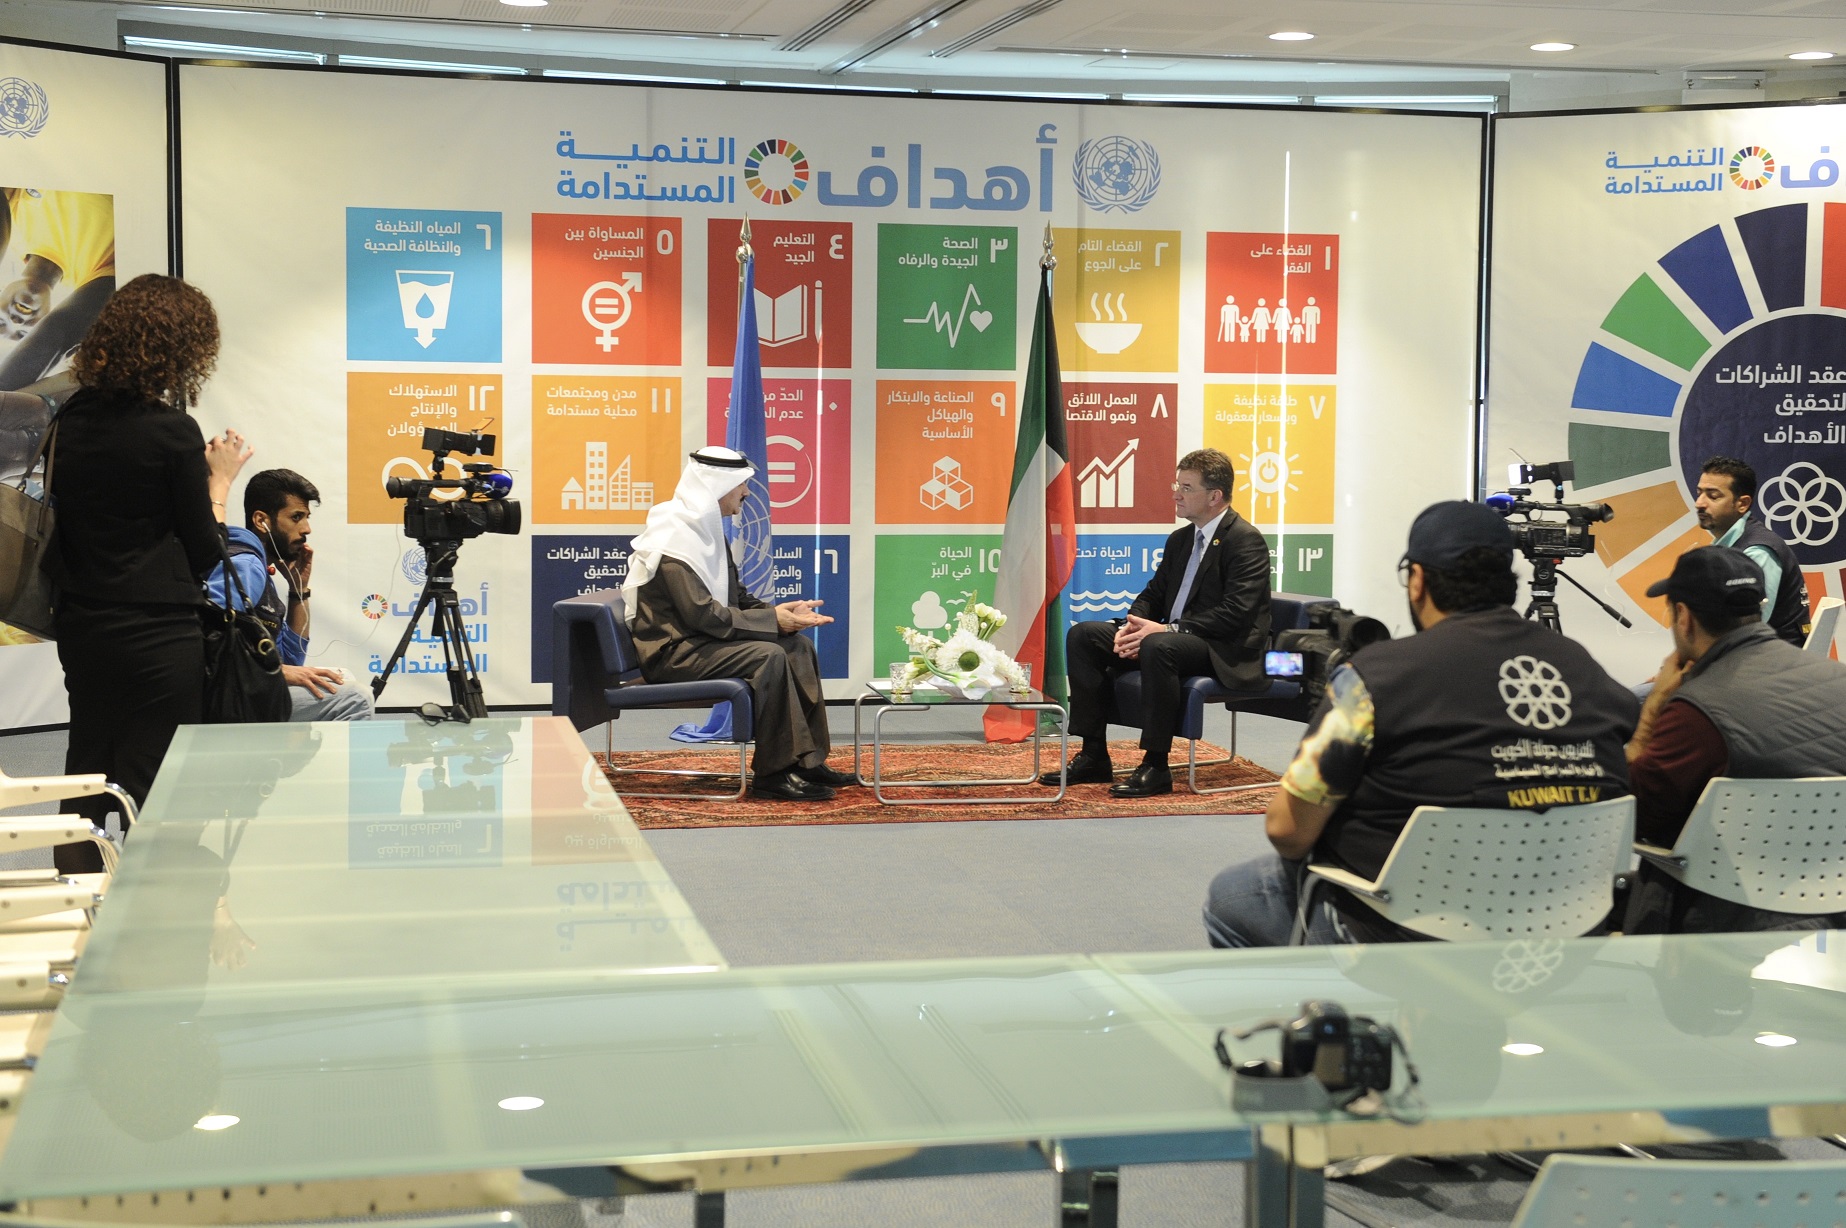 Exclusive interview with Kuwait TV and Kuwait News Agency (KUNA)